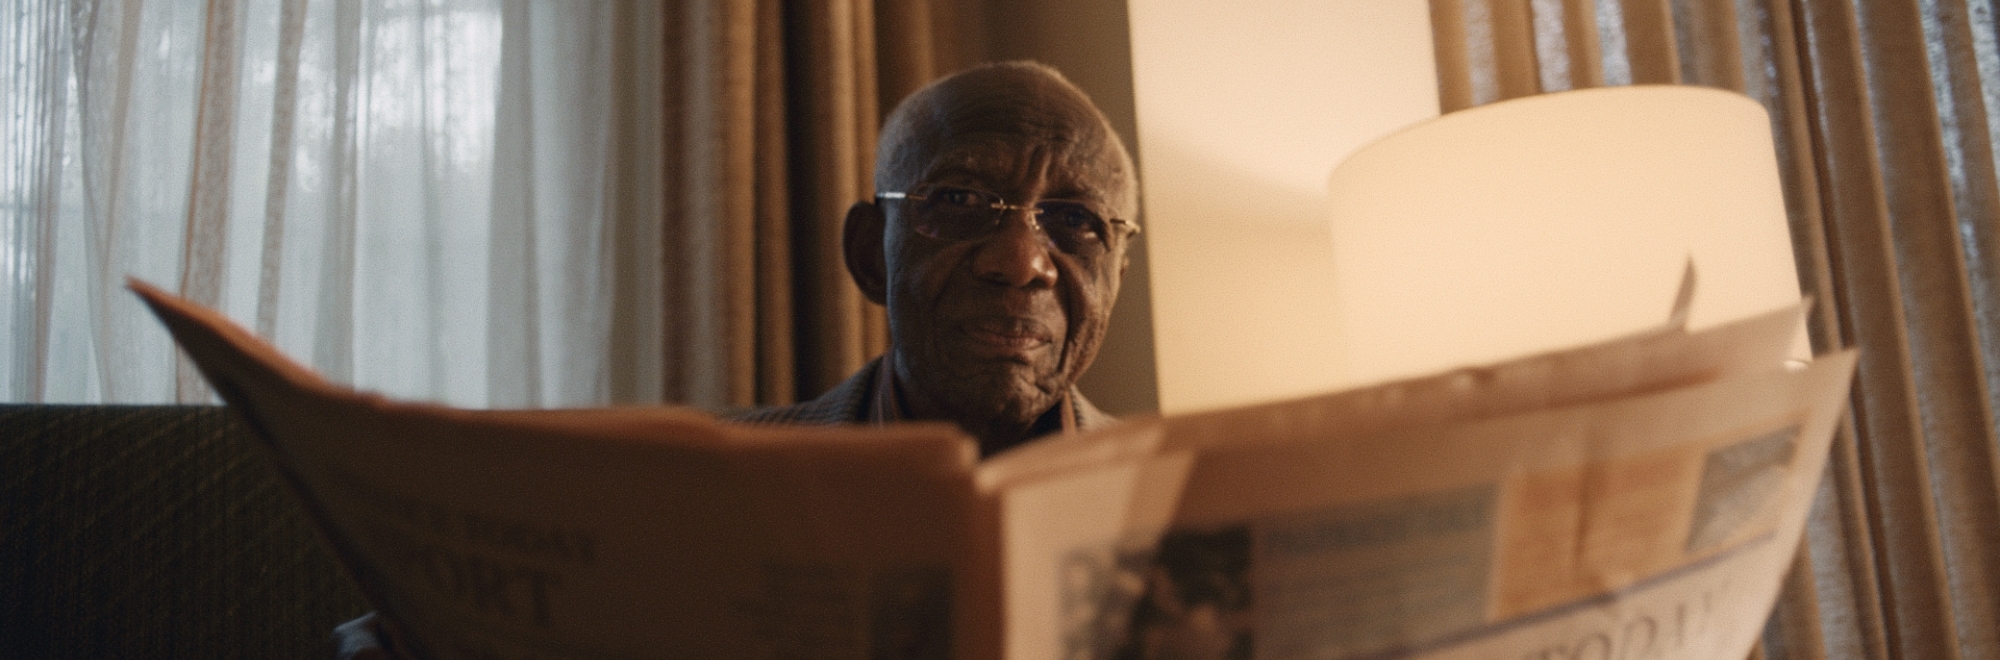 How Cadbury and Age UK's 'The Originals' campaign aims to start a proper conversation with the older generation